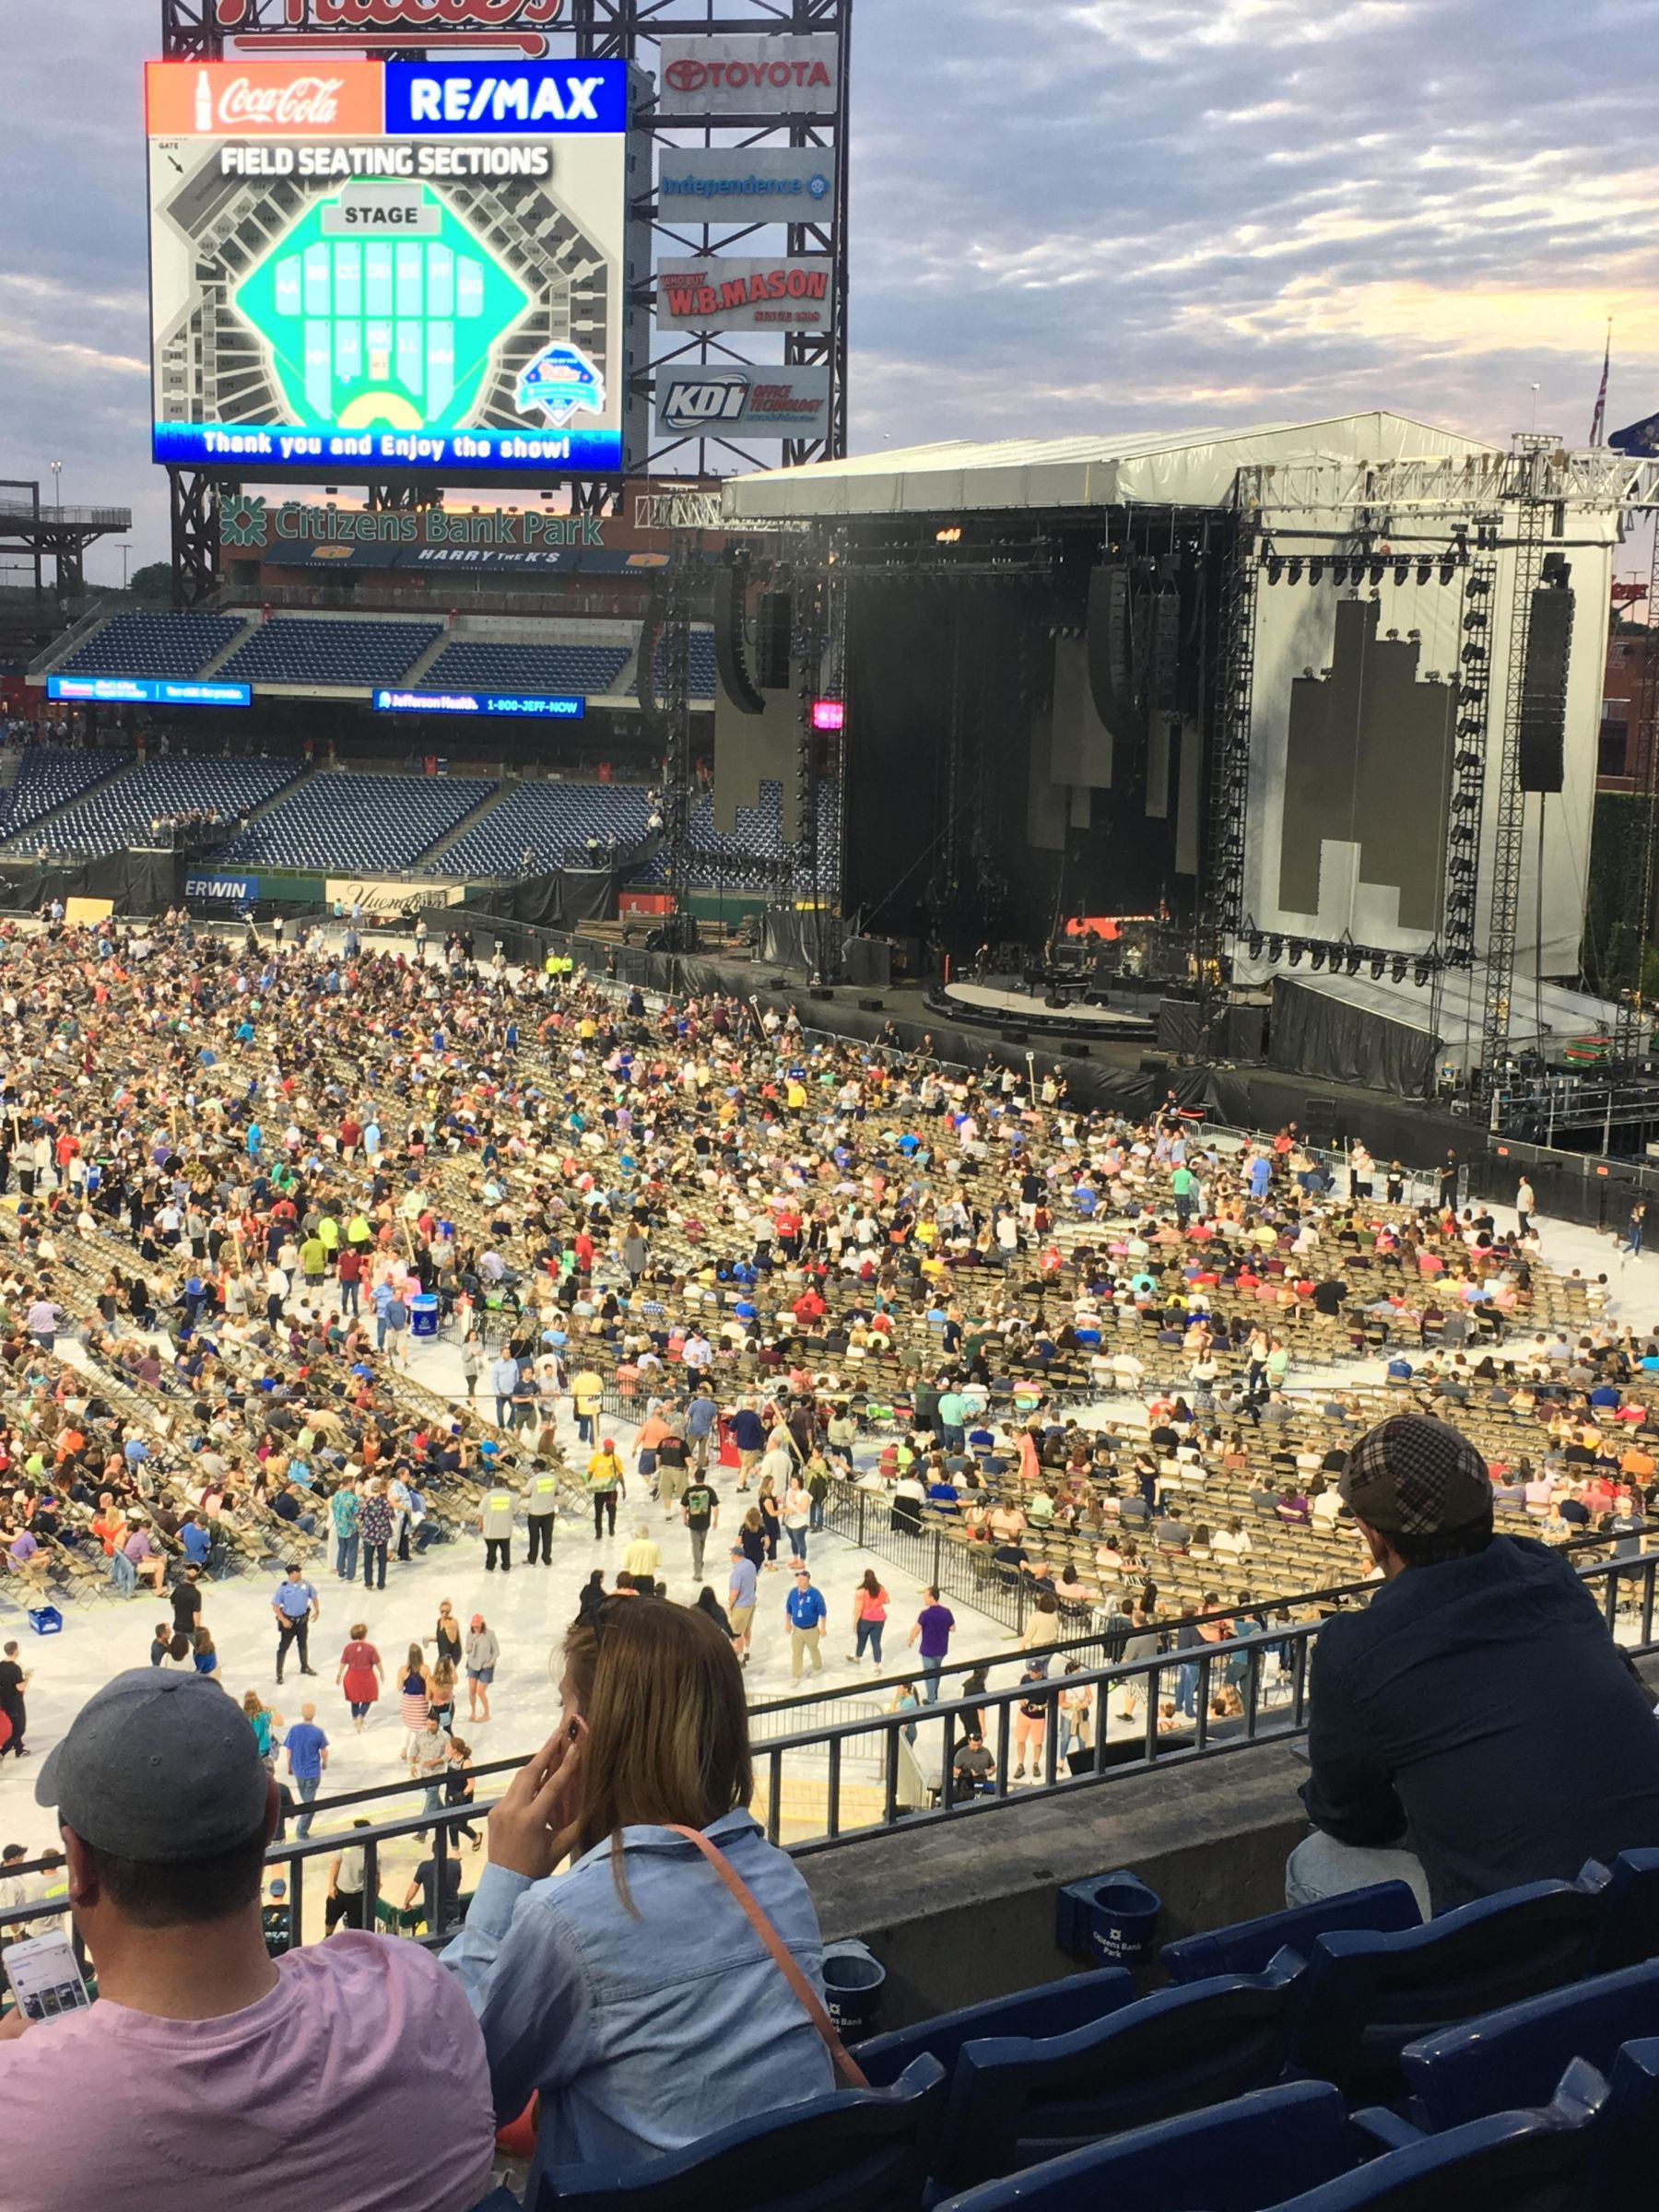 Section 209 at Citizens Bank Park for Concerts